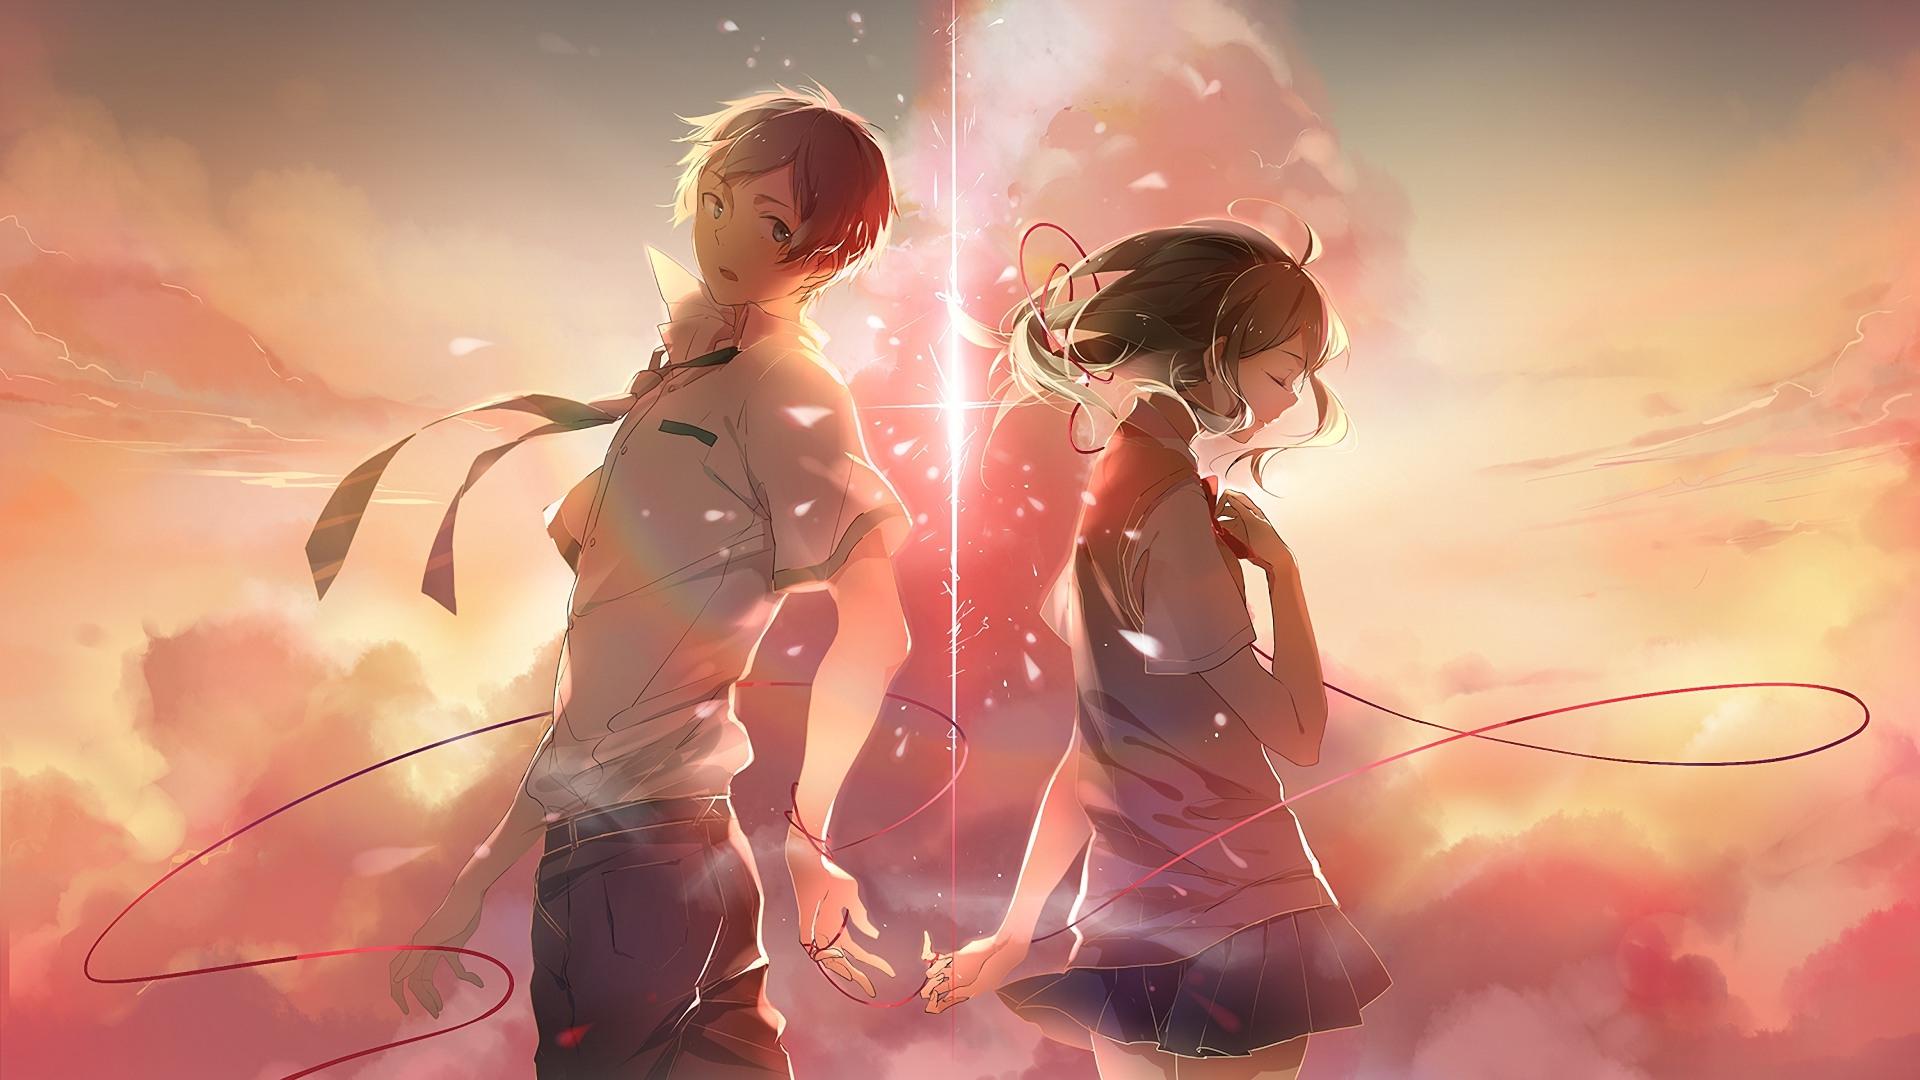 Your Name Dual Monitor Wallpaper